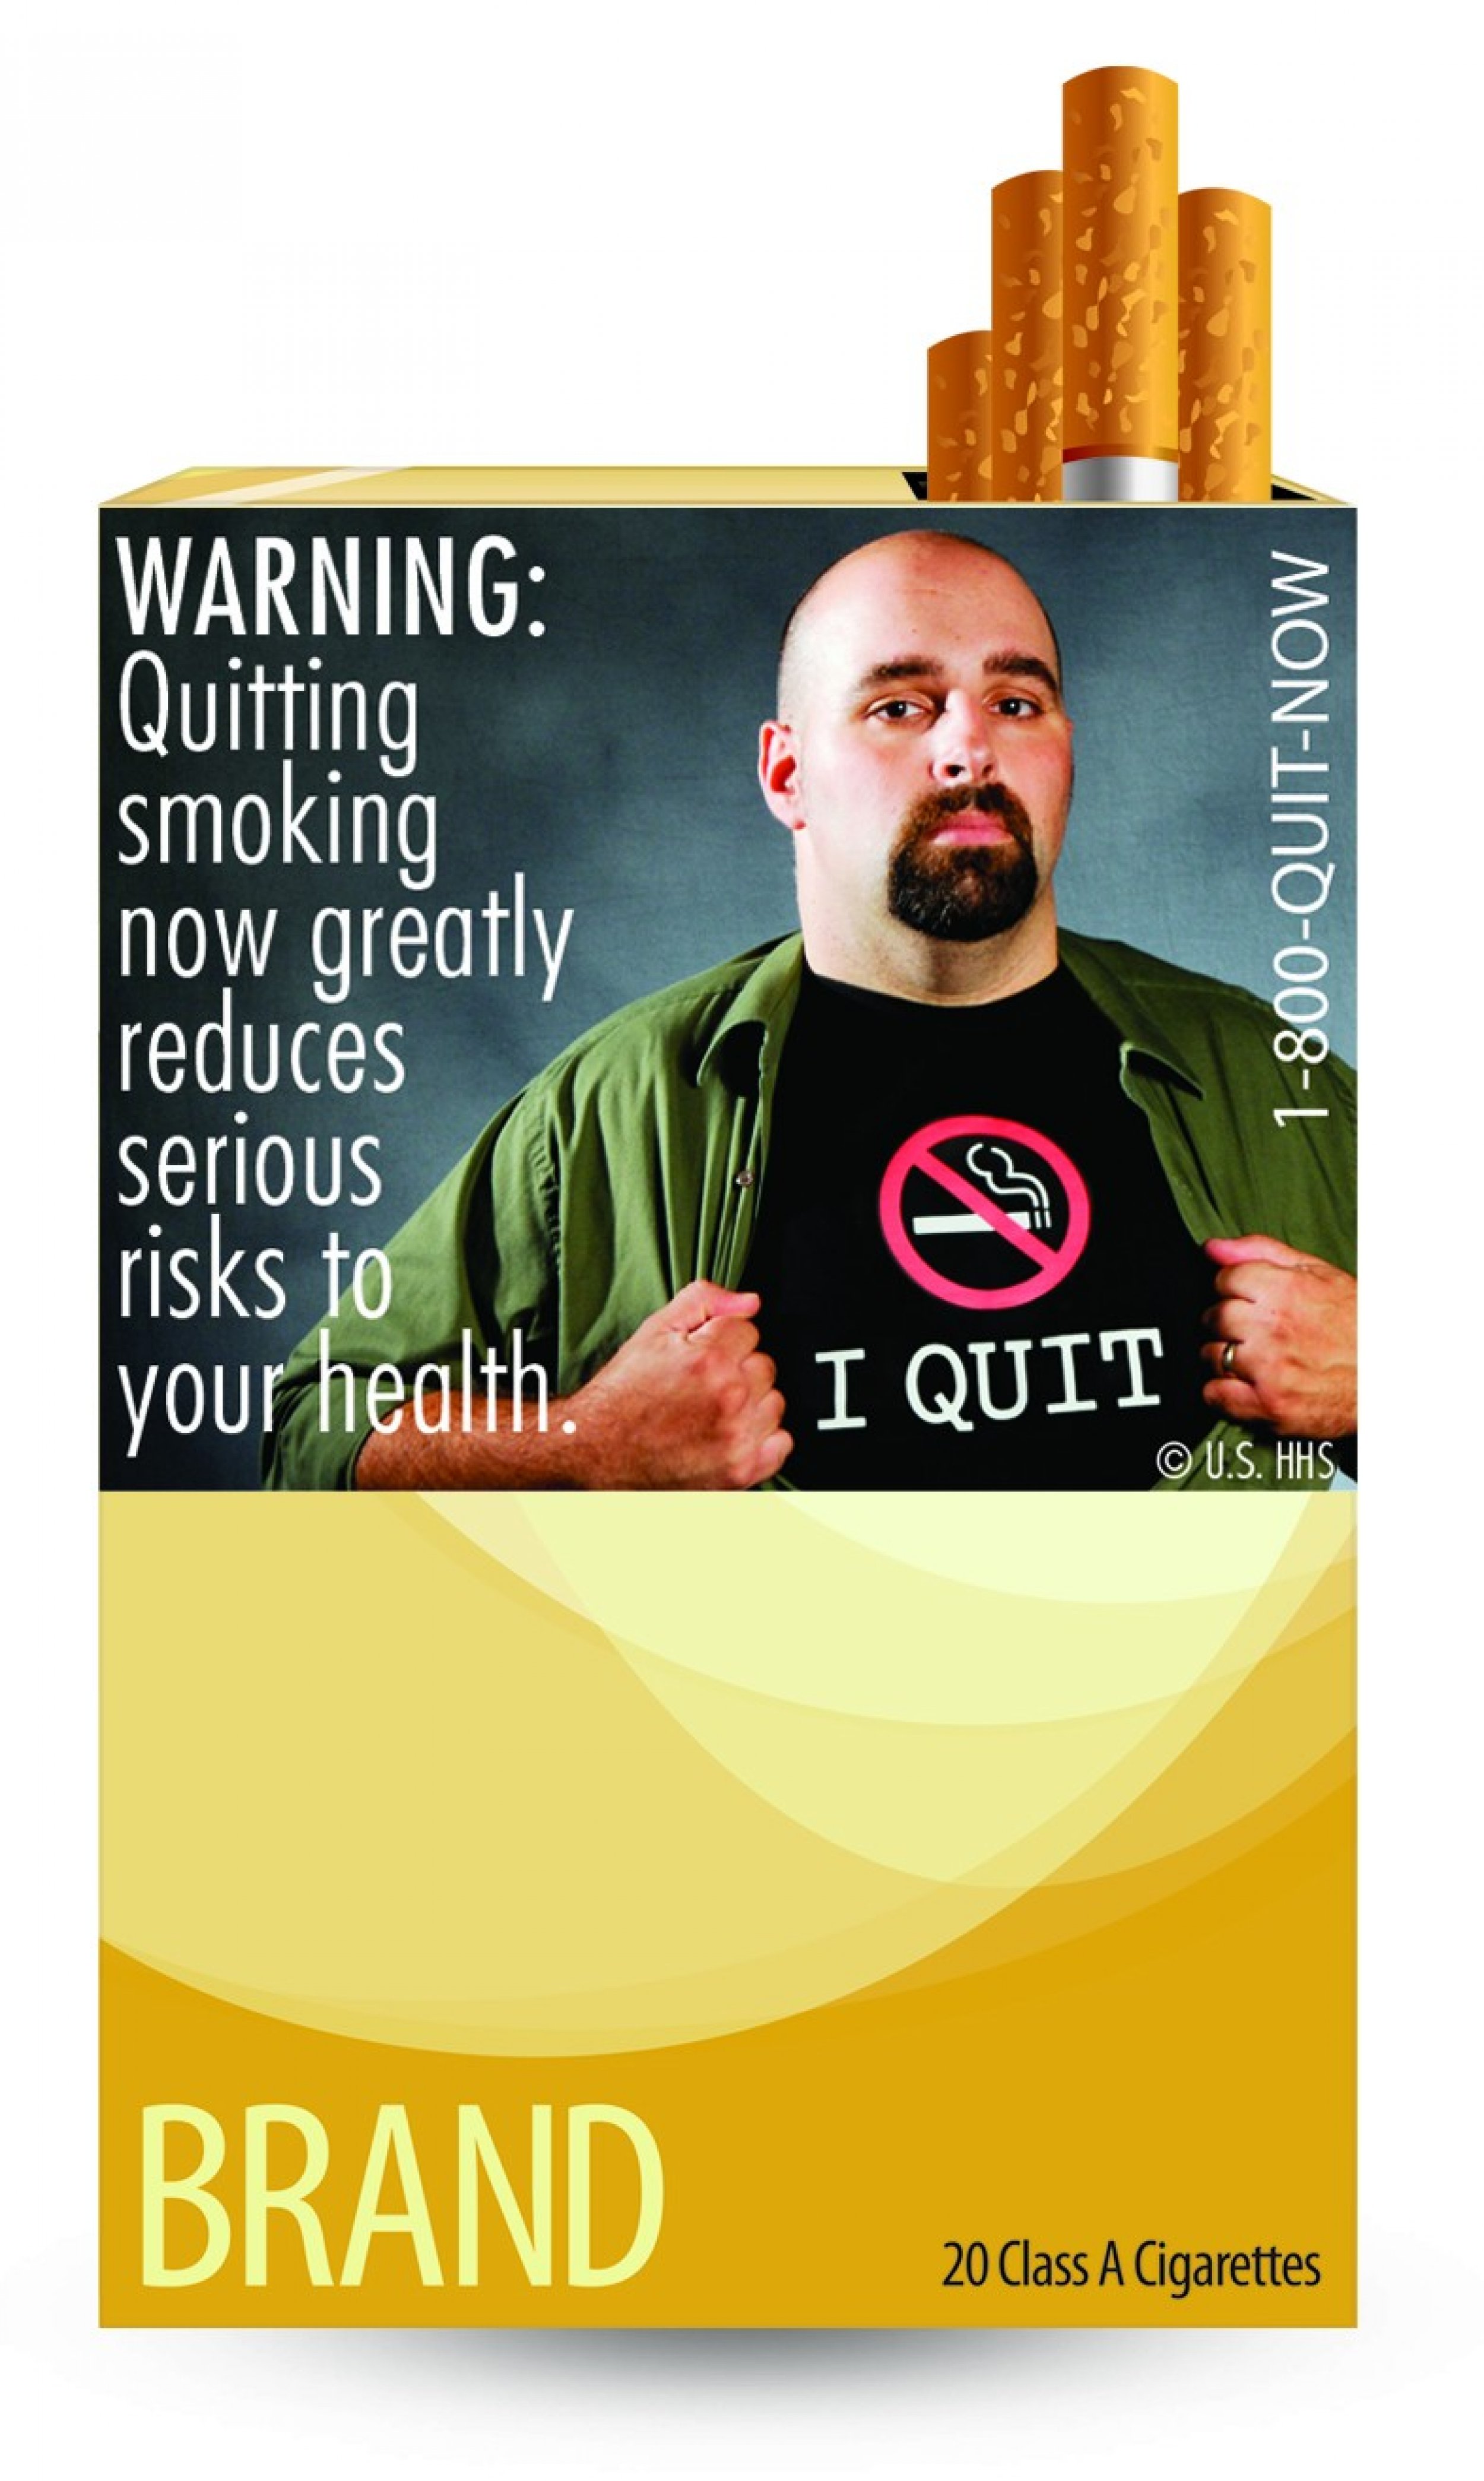 WARNING Quitting smoking now greatly reduces serious risks to your health.